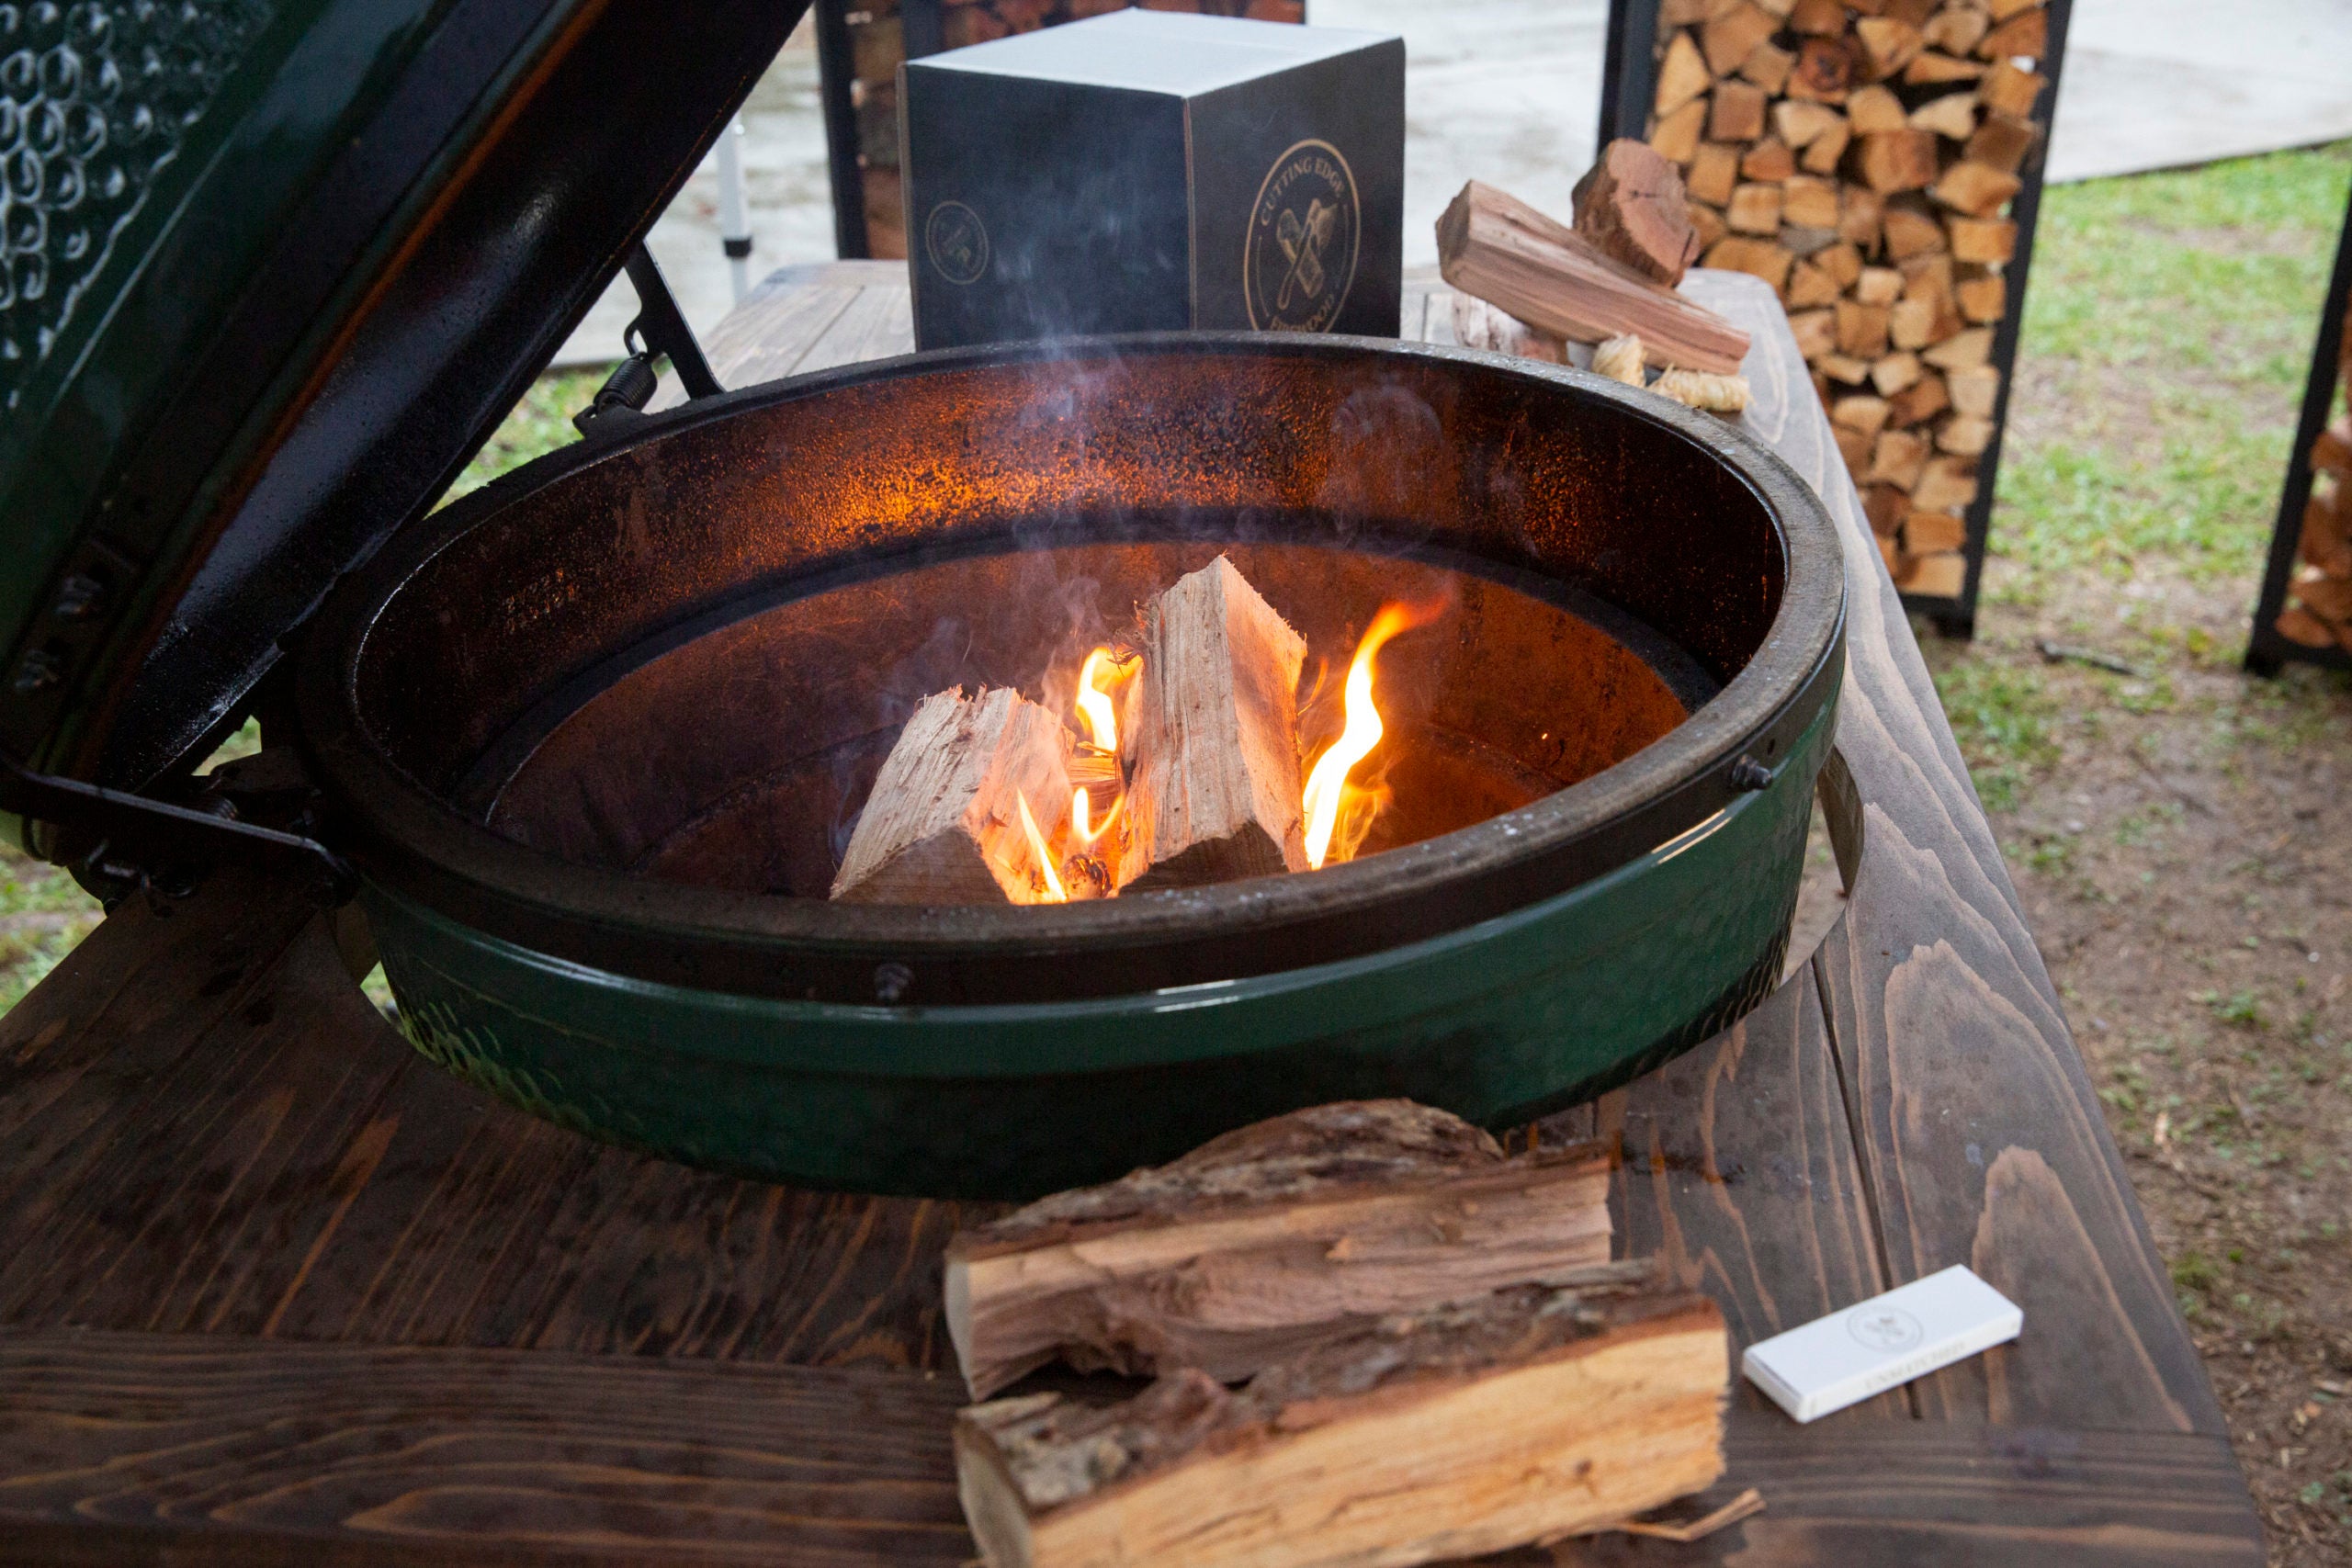 Can I Grill Using Firewood Instead of Charcoal?